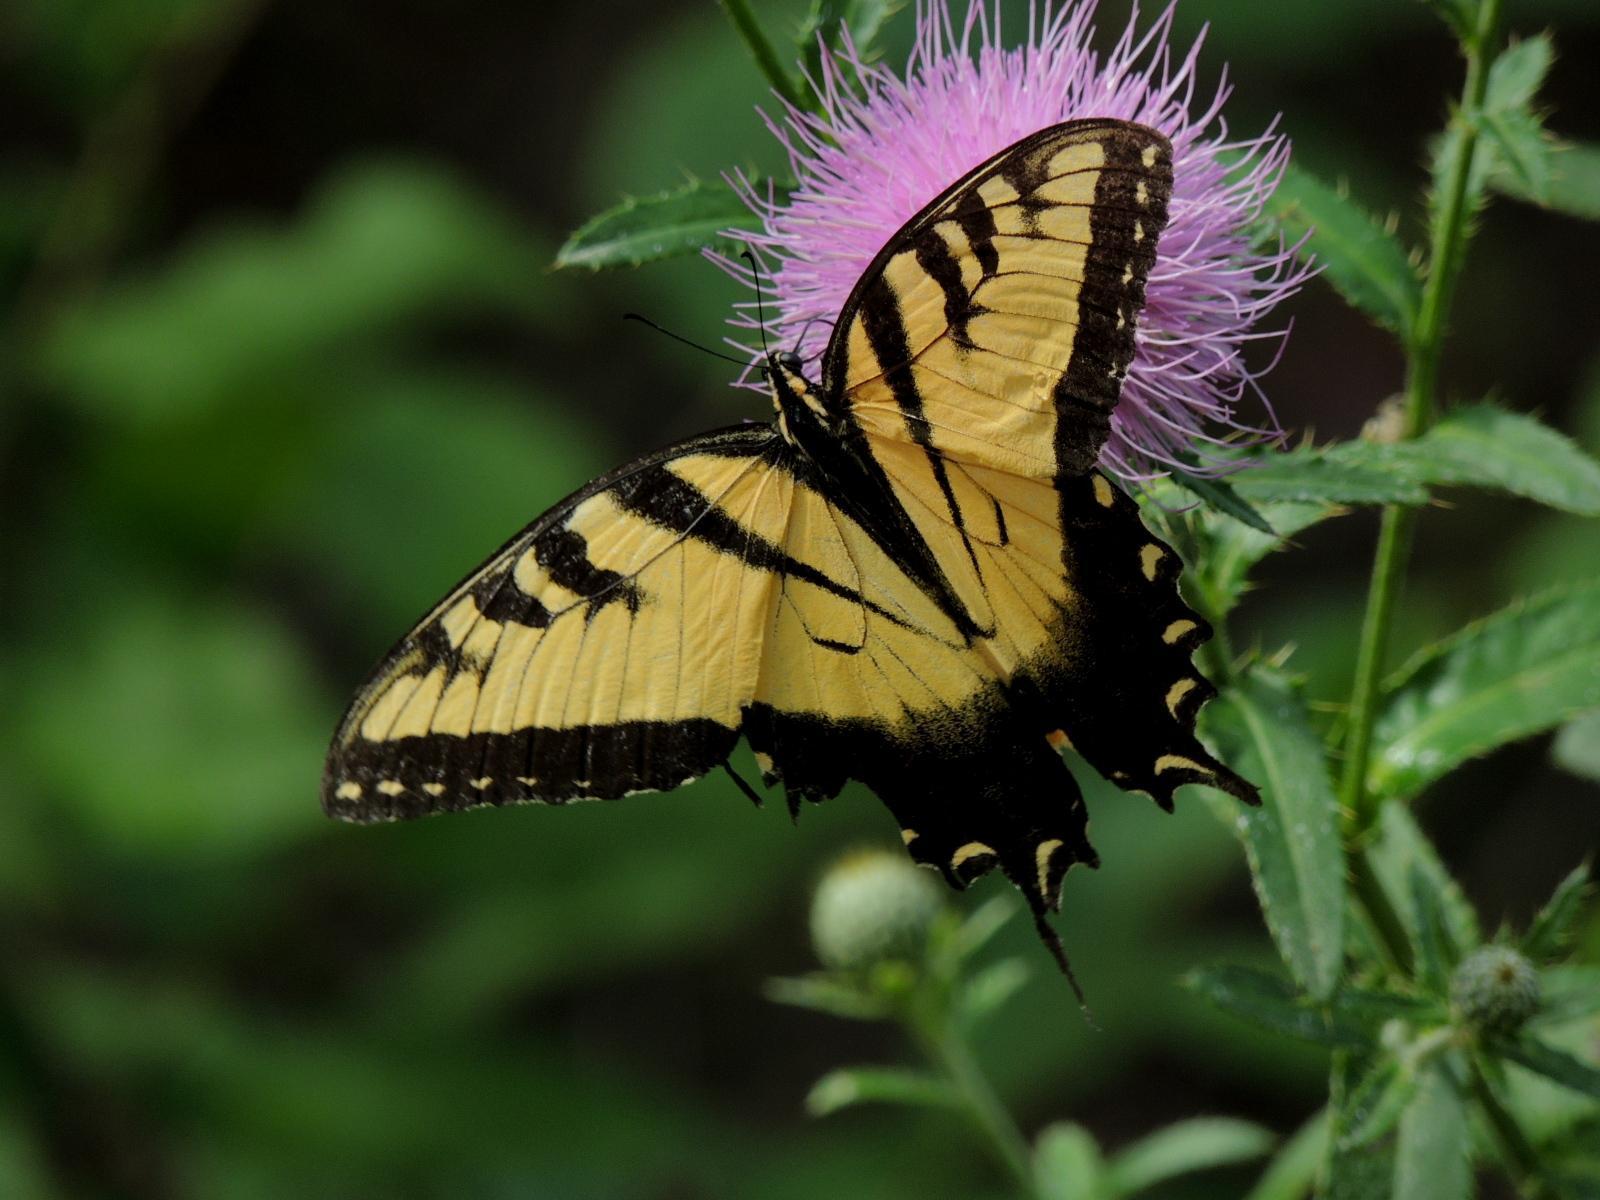 Eastern Tiger Swallowtail Photo by Tony Heindel